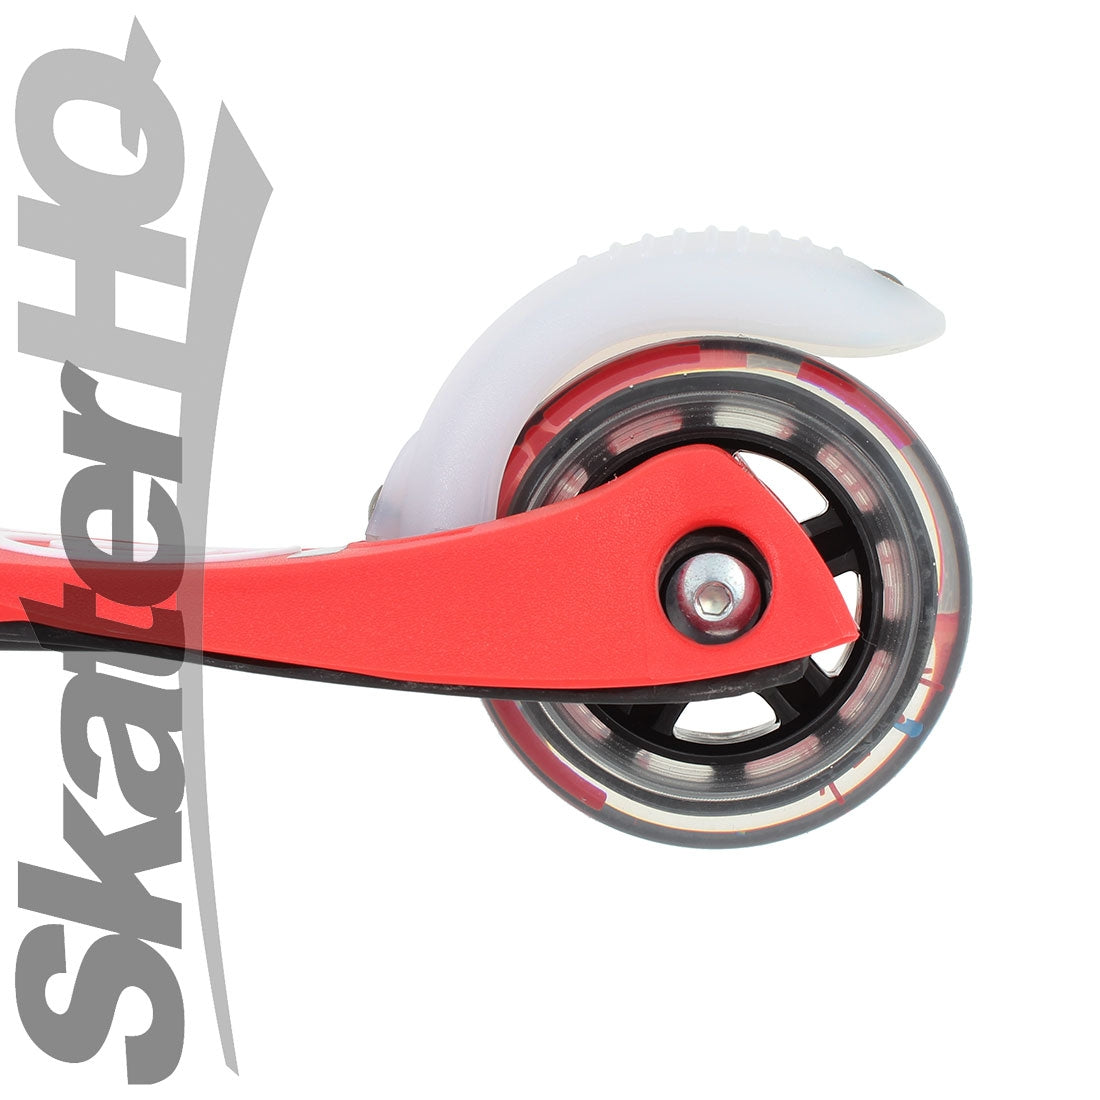 Micro Mini Deluxe Scooter - Red Scooter Completes Rec